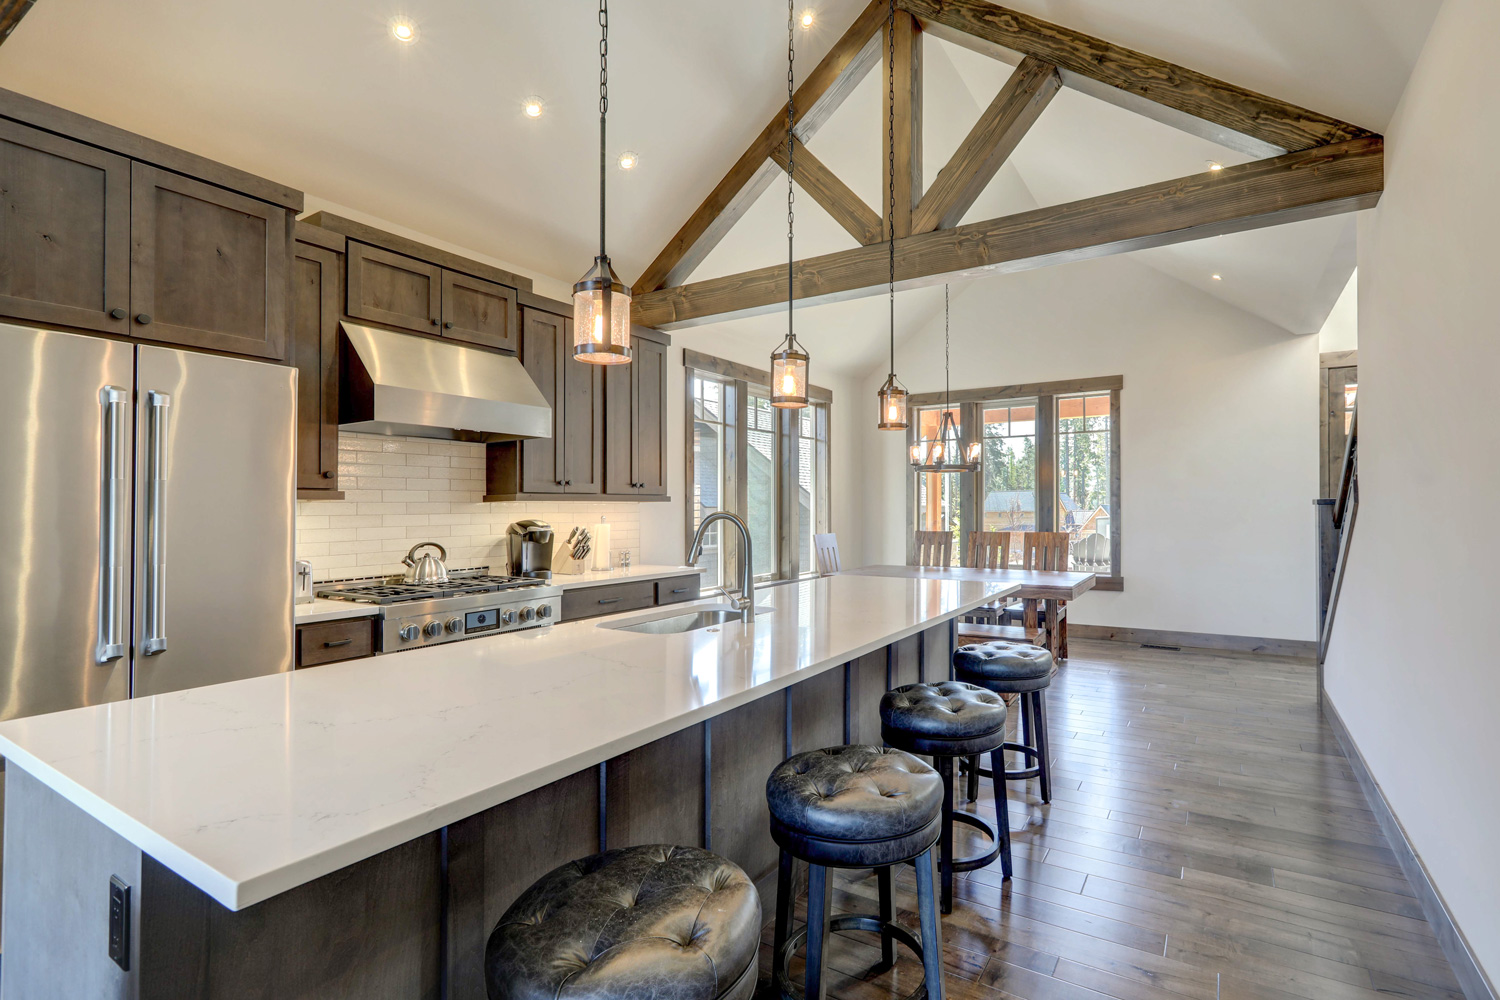 Amazing modern and rustic luxury kitchen with vaulted ceiling and wooden beams, long island with white quarts countertop and dark wood cabinets.